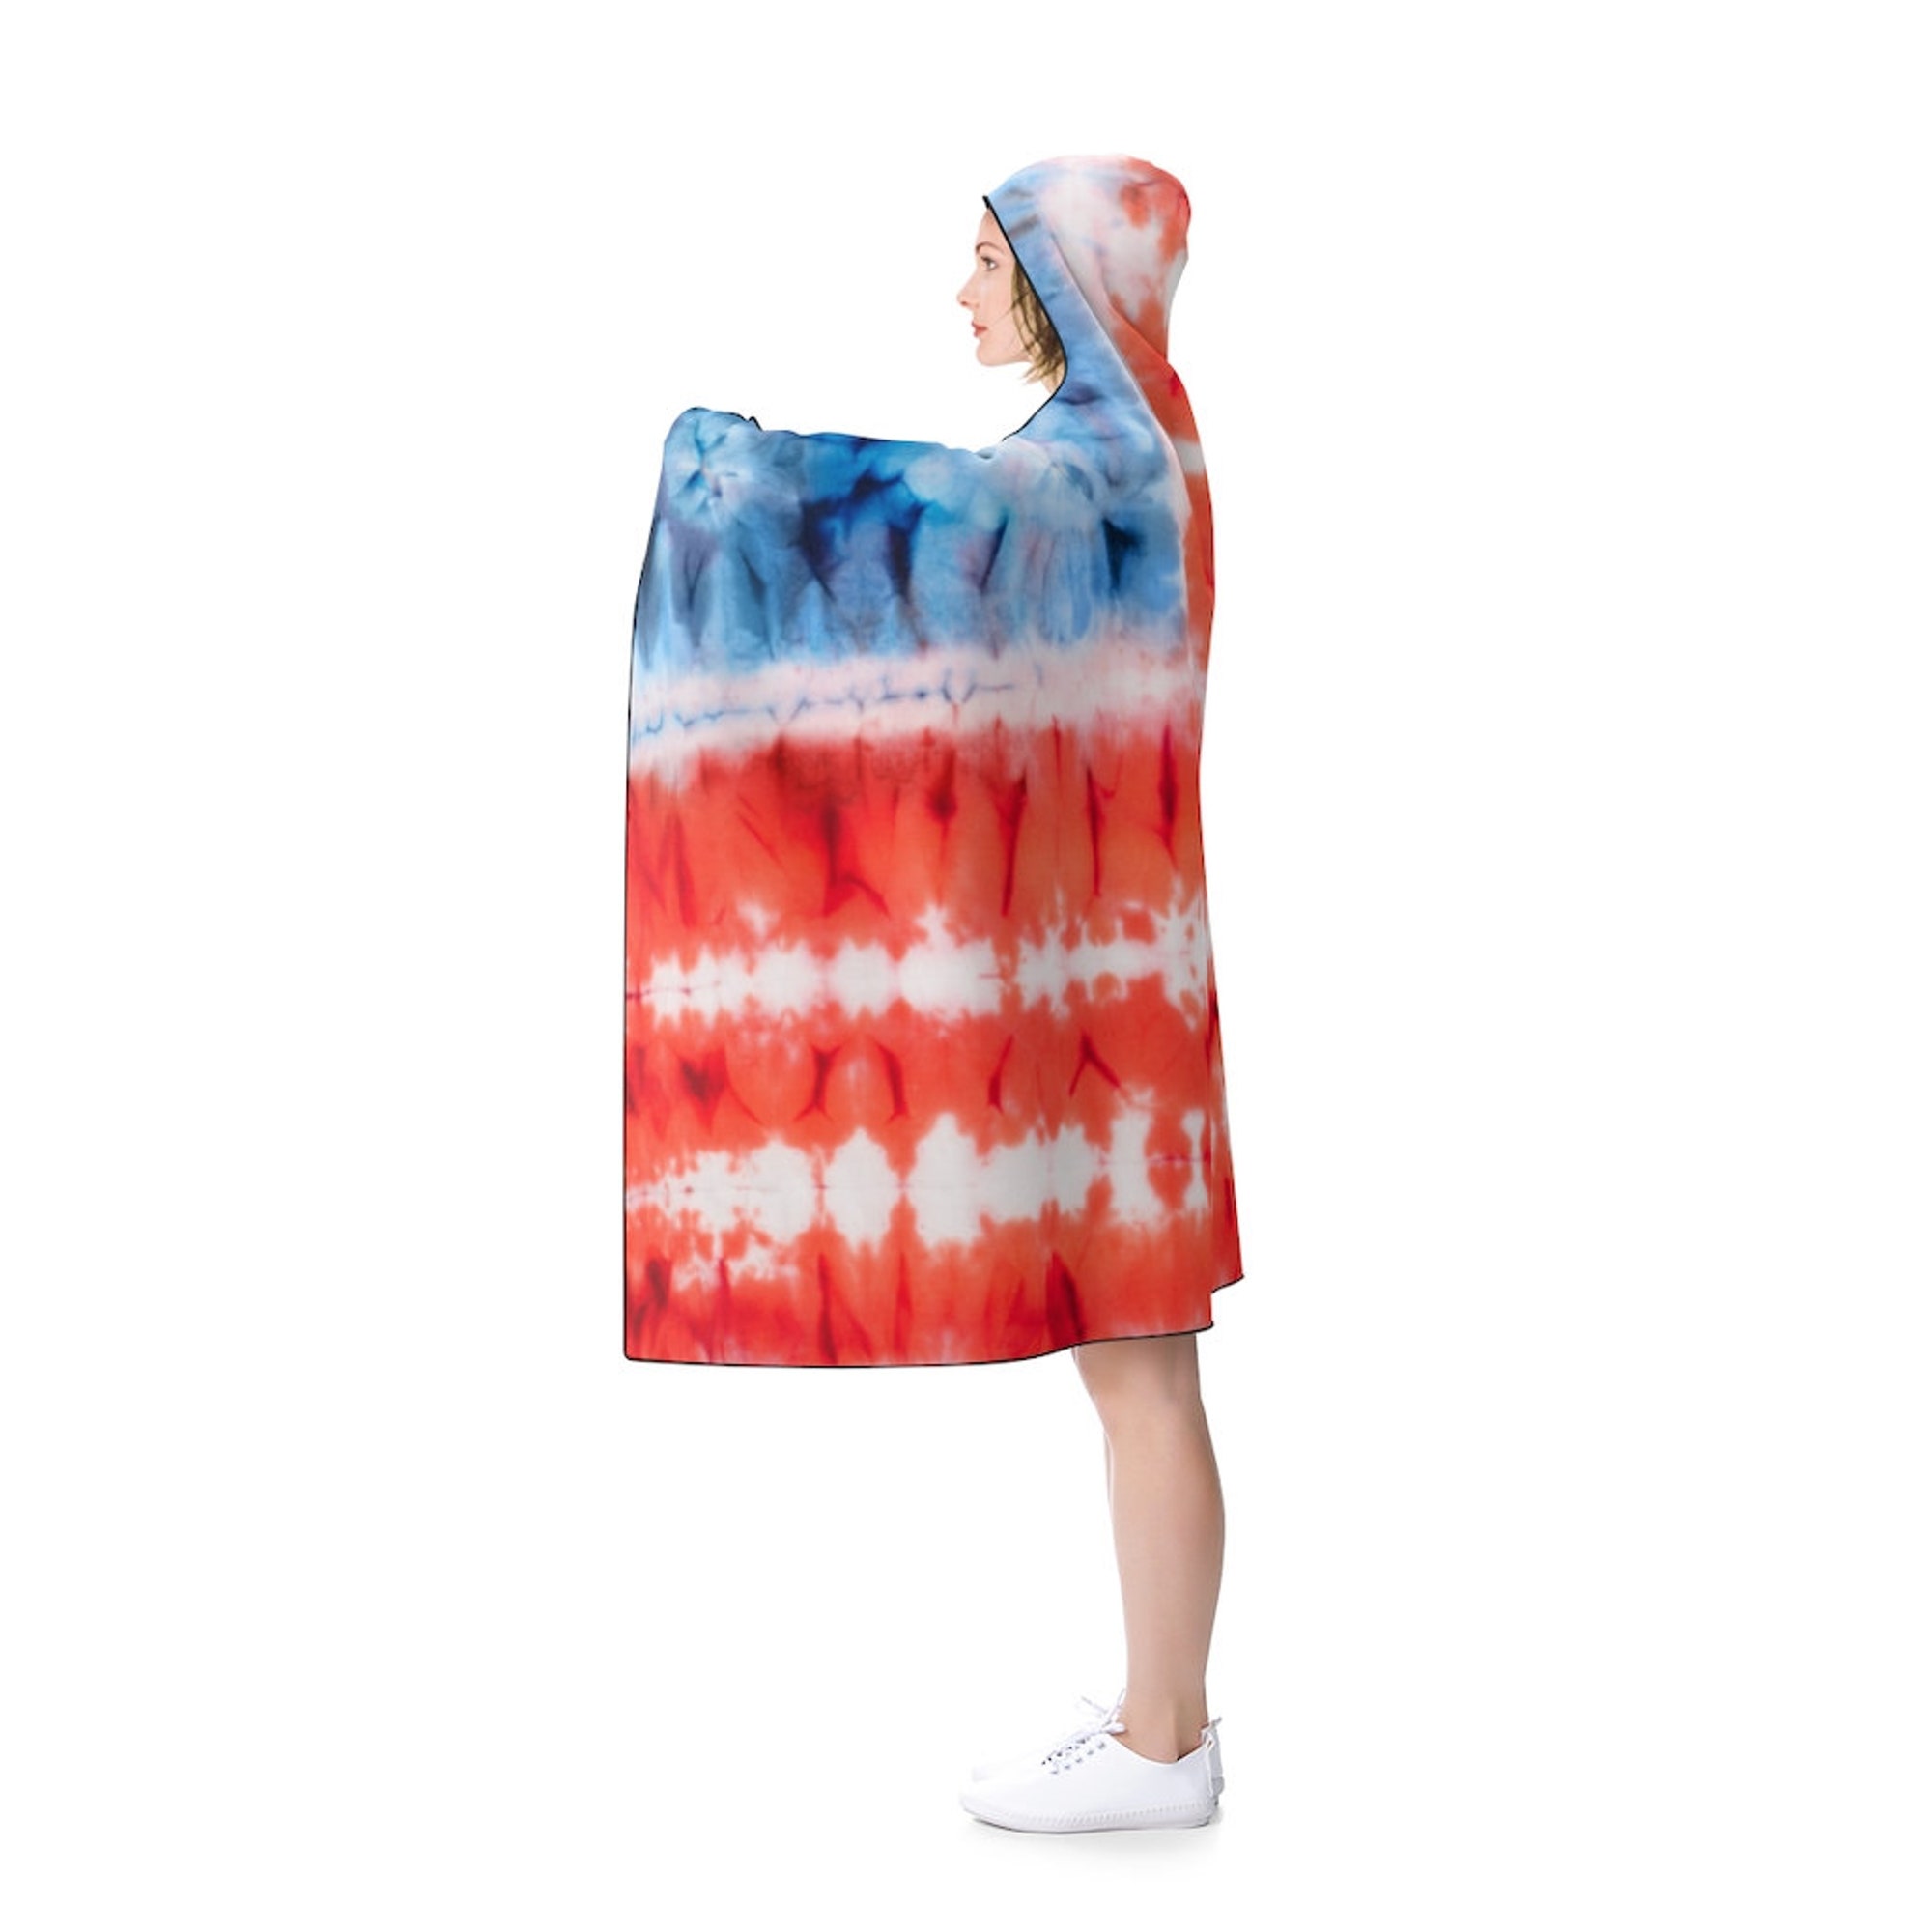 Hooded Blanket, memorial day, 4th of July, American flag, red white and blue, Tie dye, patriotic, warm, comfy, snugly,  friends gifts